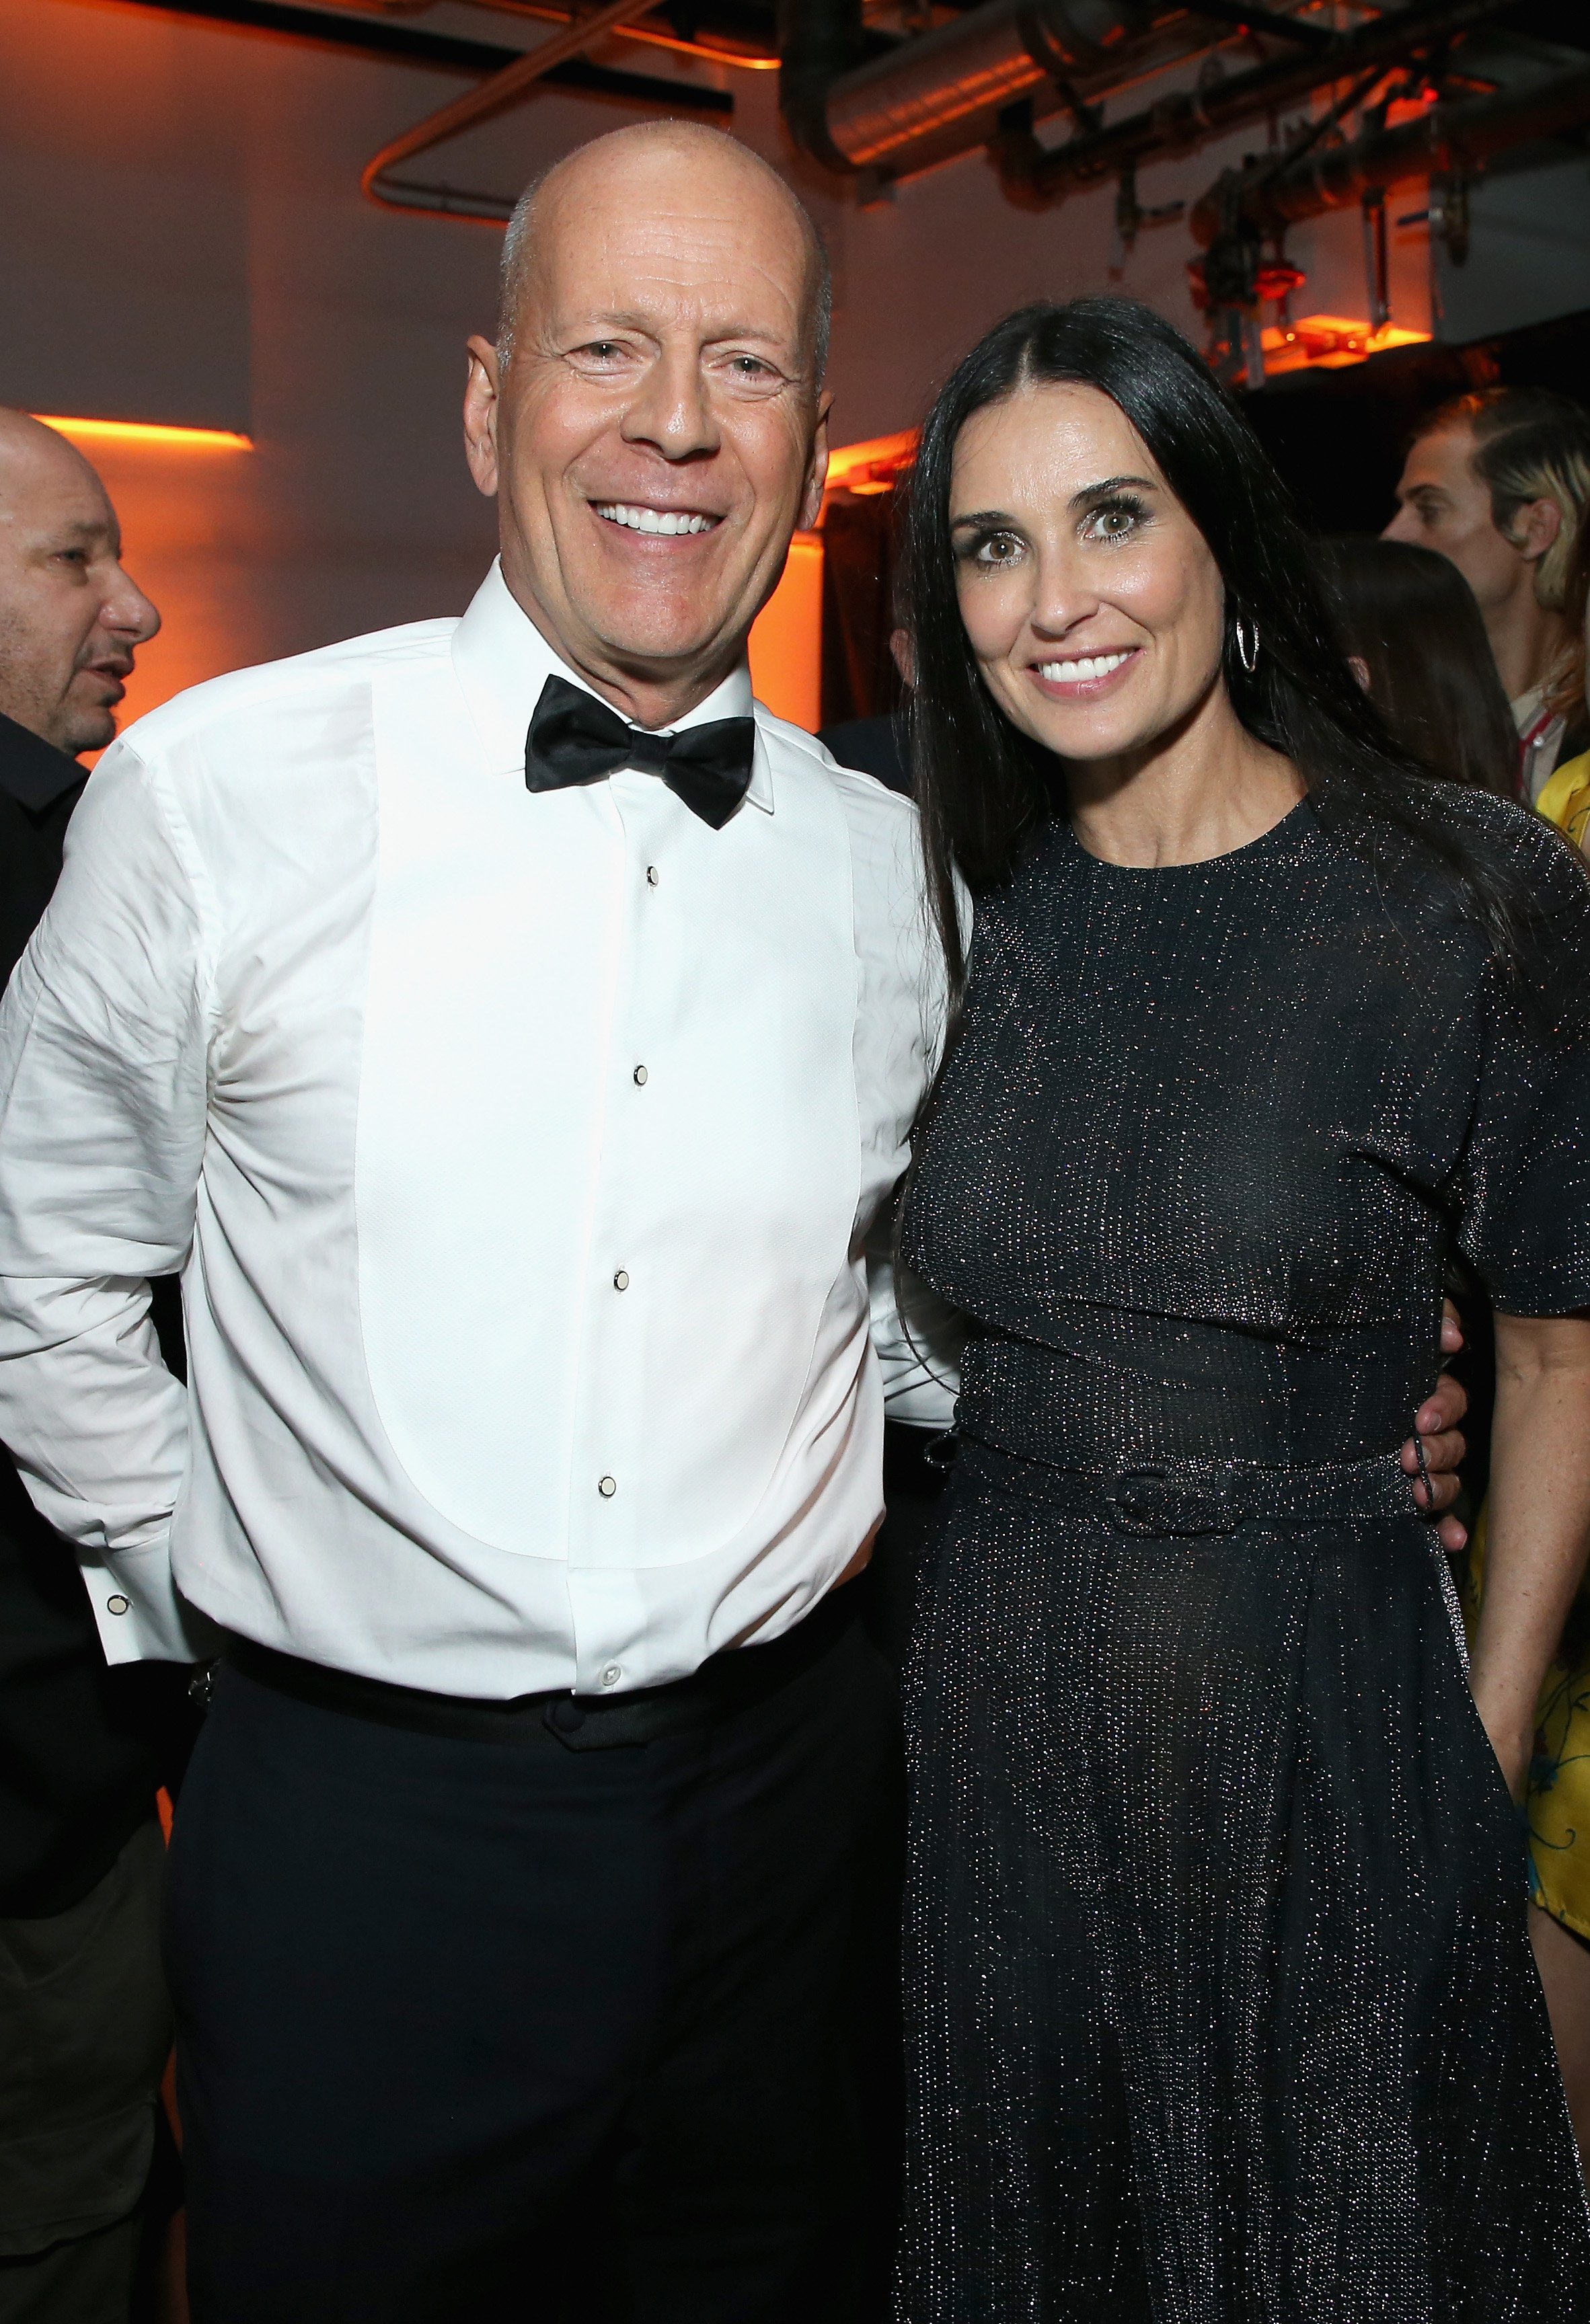  Bruce Willis and Demi Moore attend the after party for the Comedy Central Roast of Bruce Willis at NeueHouse on July 14, 2018 | Source: Getty Images